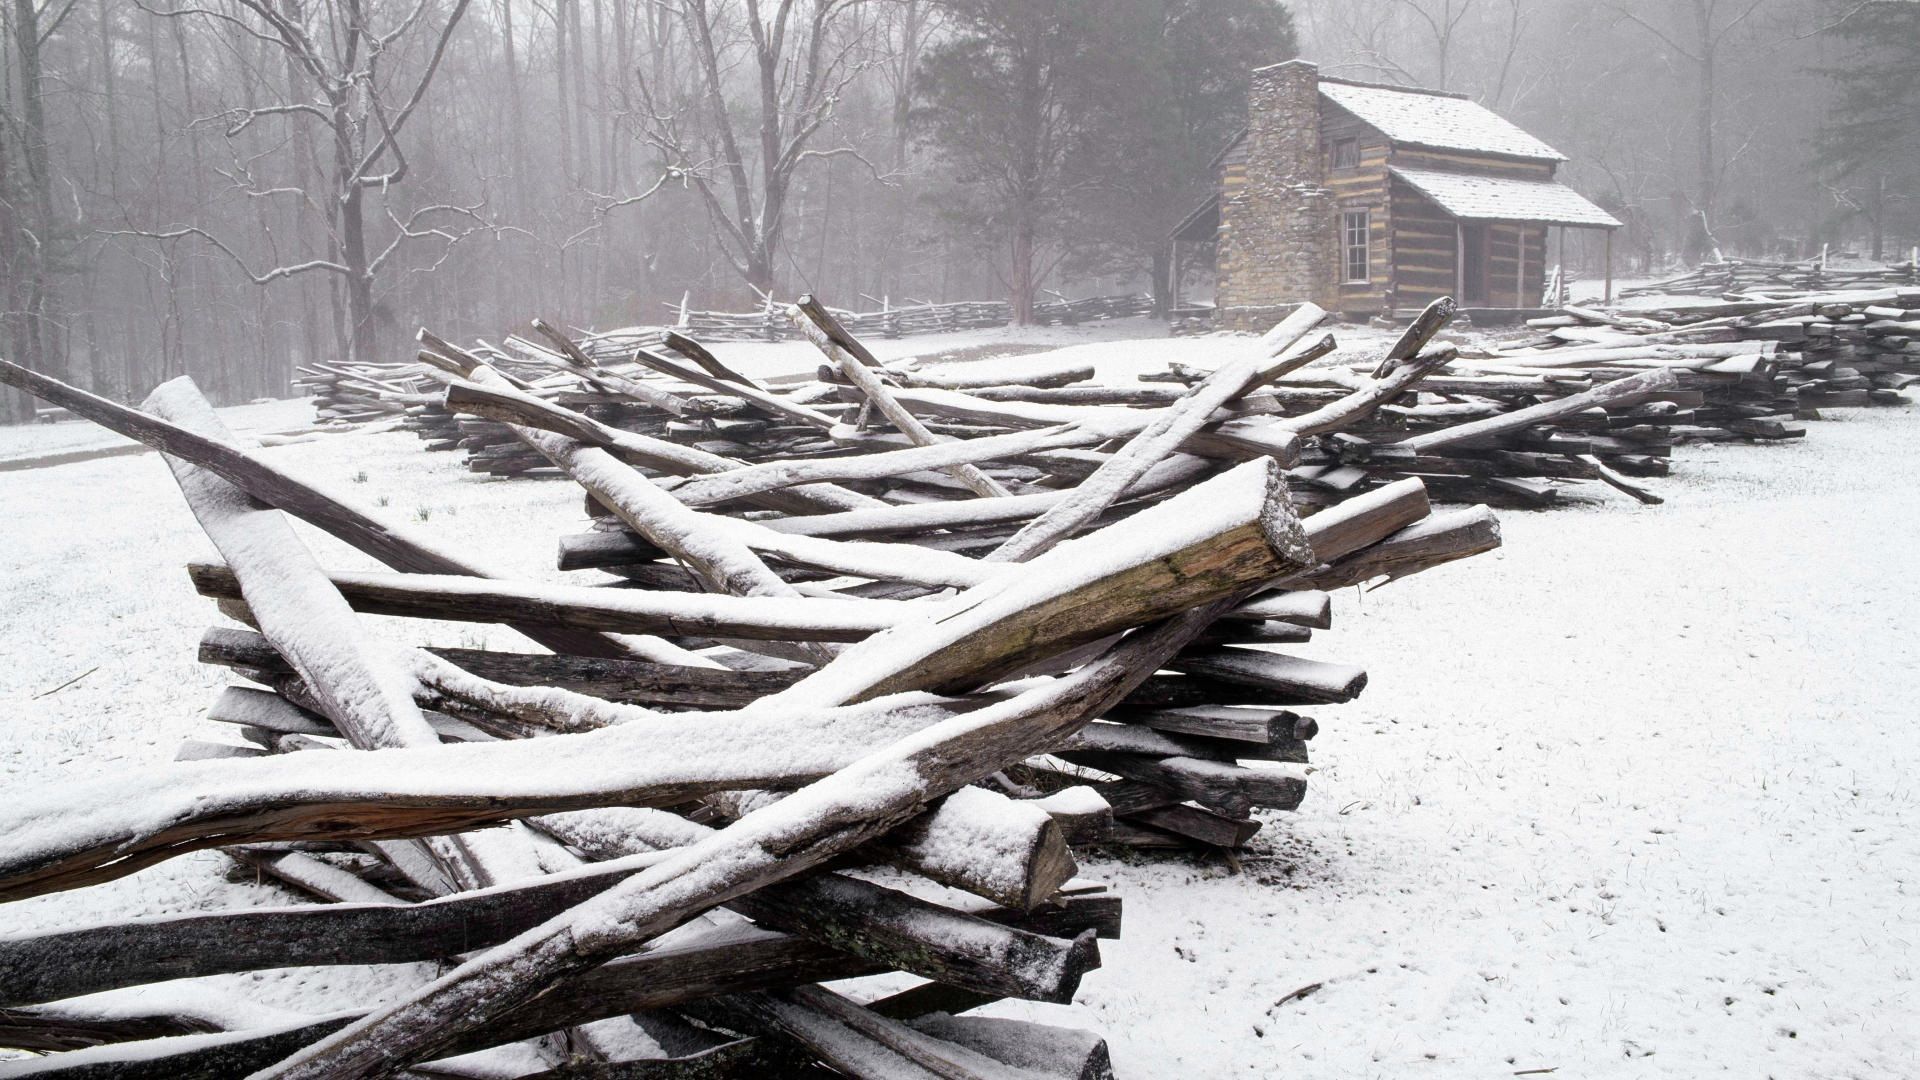 Historical finds. Smokey mountains national park, Great smoky mountains national park, Winter photo